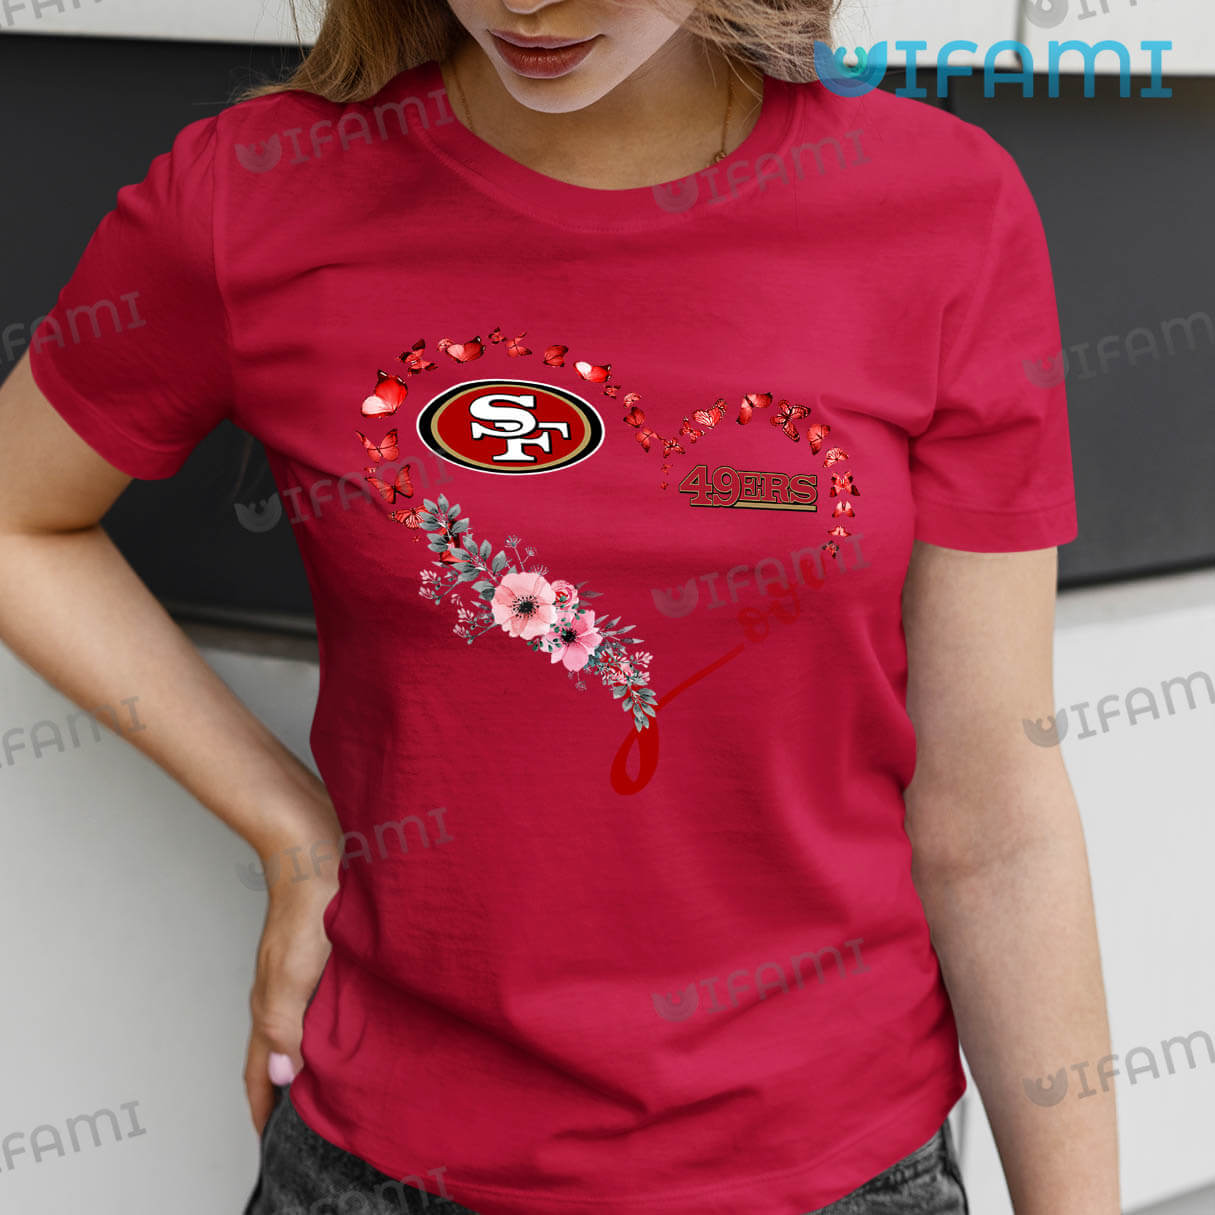 Red Sox Heart, Boston Red Sox T-Shirt For Women - Personalized Gifts:  Family, Sports, Occasions, Trending